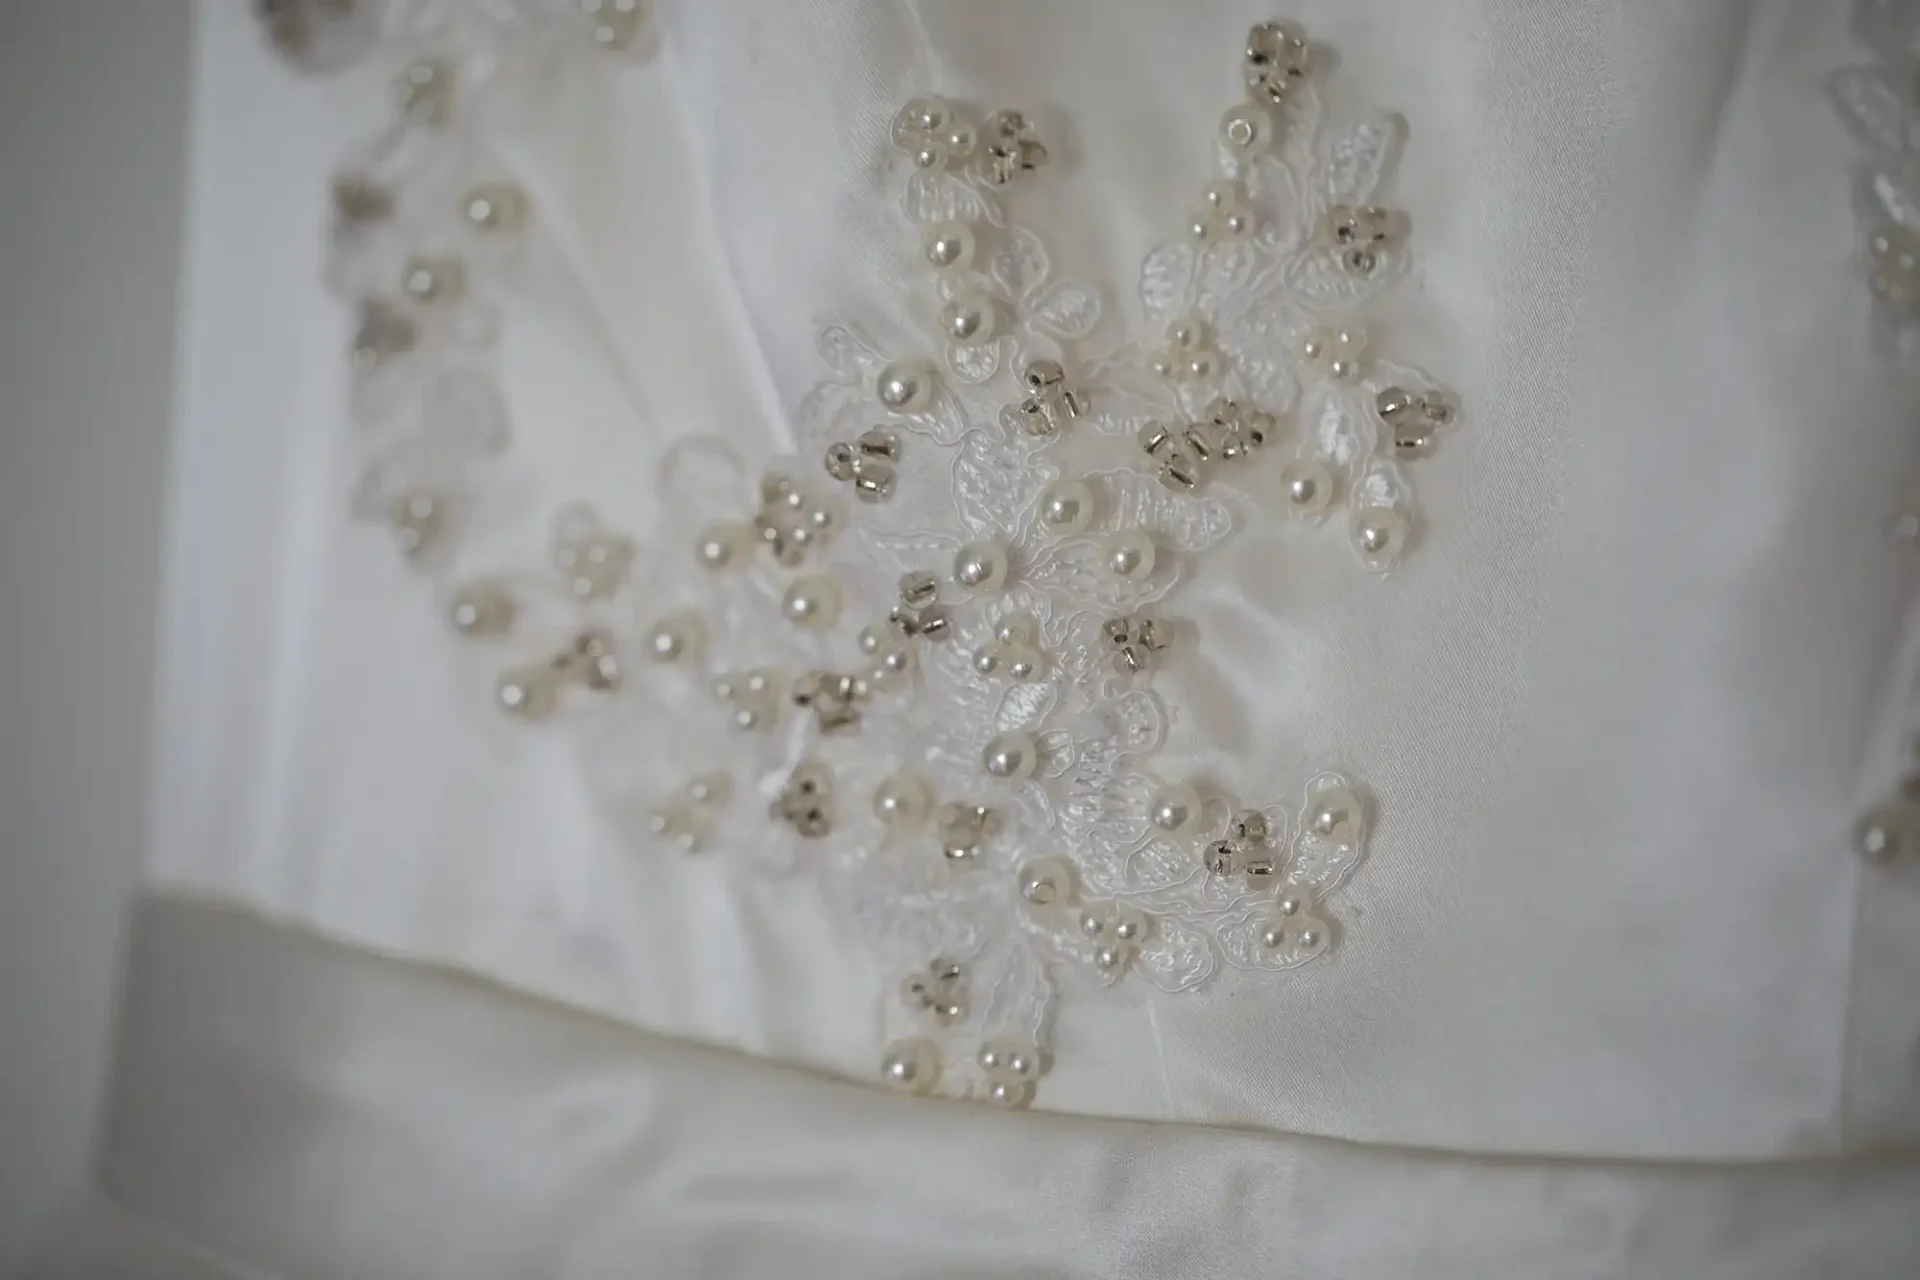 Close-up of a white wedding dress with detailed pearl and bead embroidery on lace applique.